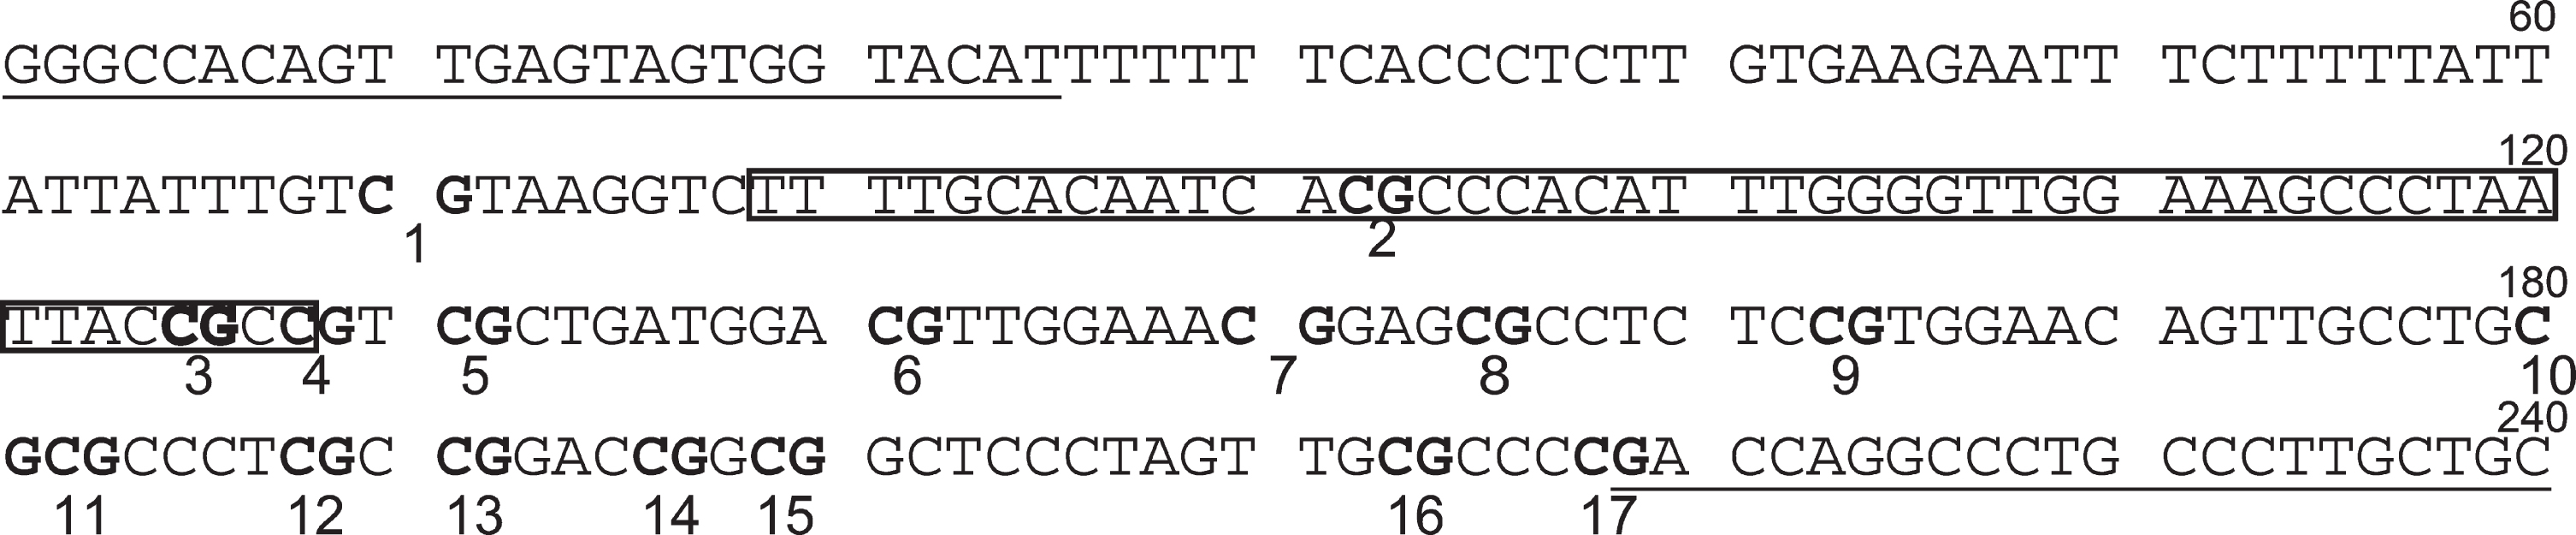 WNT5A upstream sequence corresponding to PCR amplification region. Underlined parts indicate primer-binding sites. Boxes indicate probe-binding sites. CpGs are indicated as bold characters. The 3rd CpG is the target site of the Illumina Infinitum HD Methylation Assay.